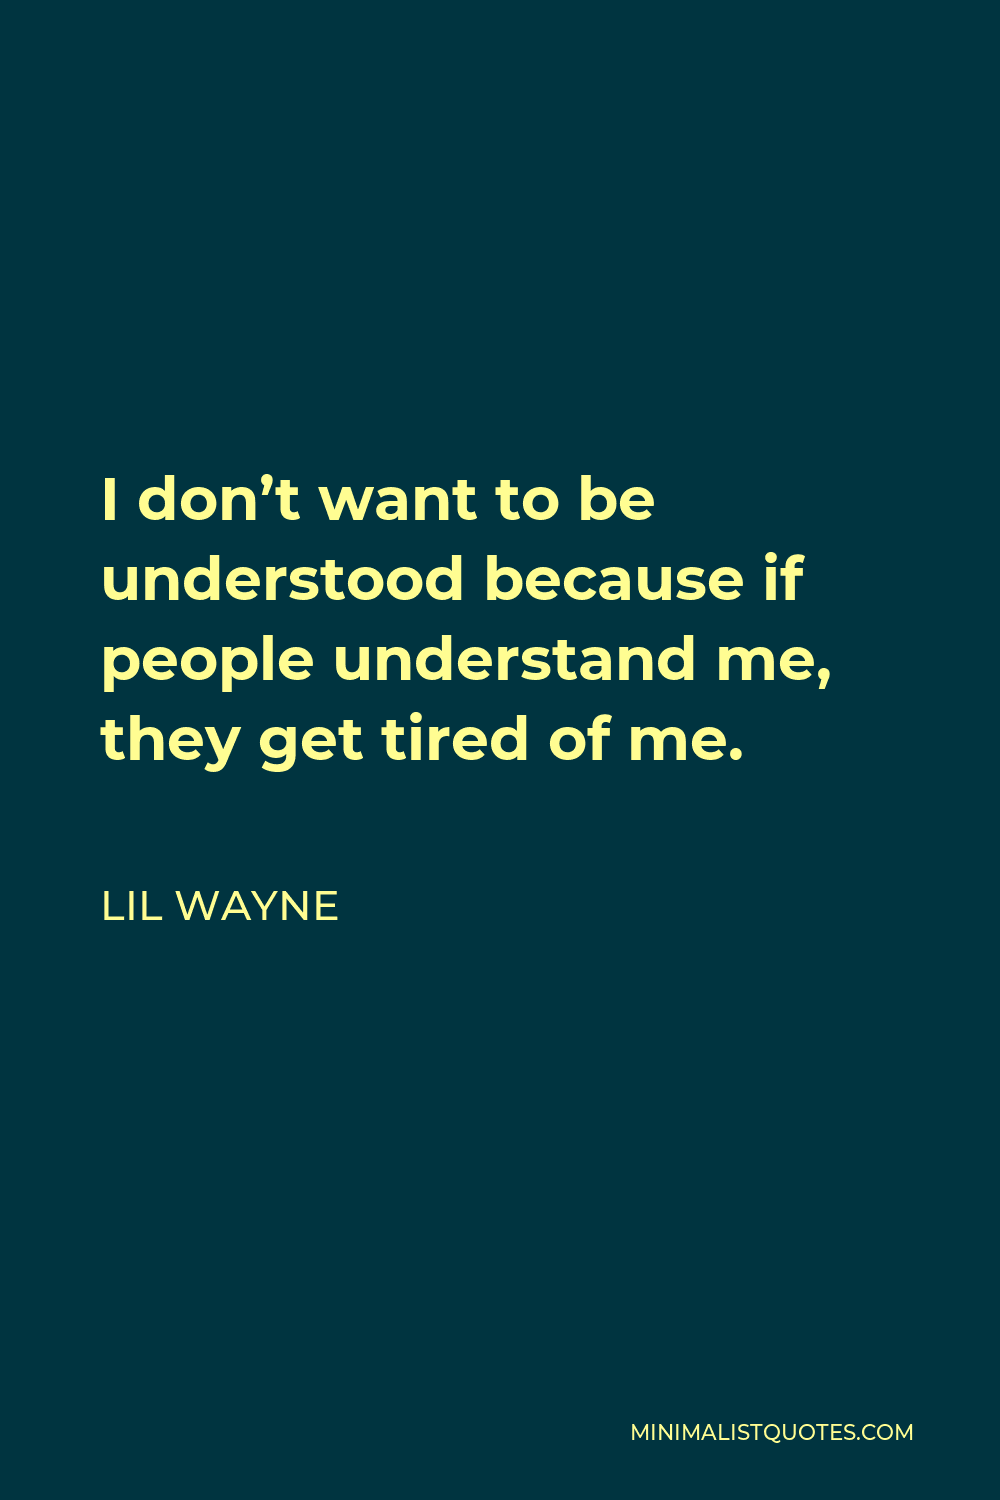 Lil Wayne Quote: “I have no stress, because I am the best.”